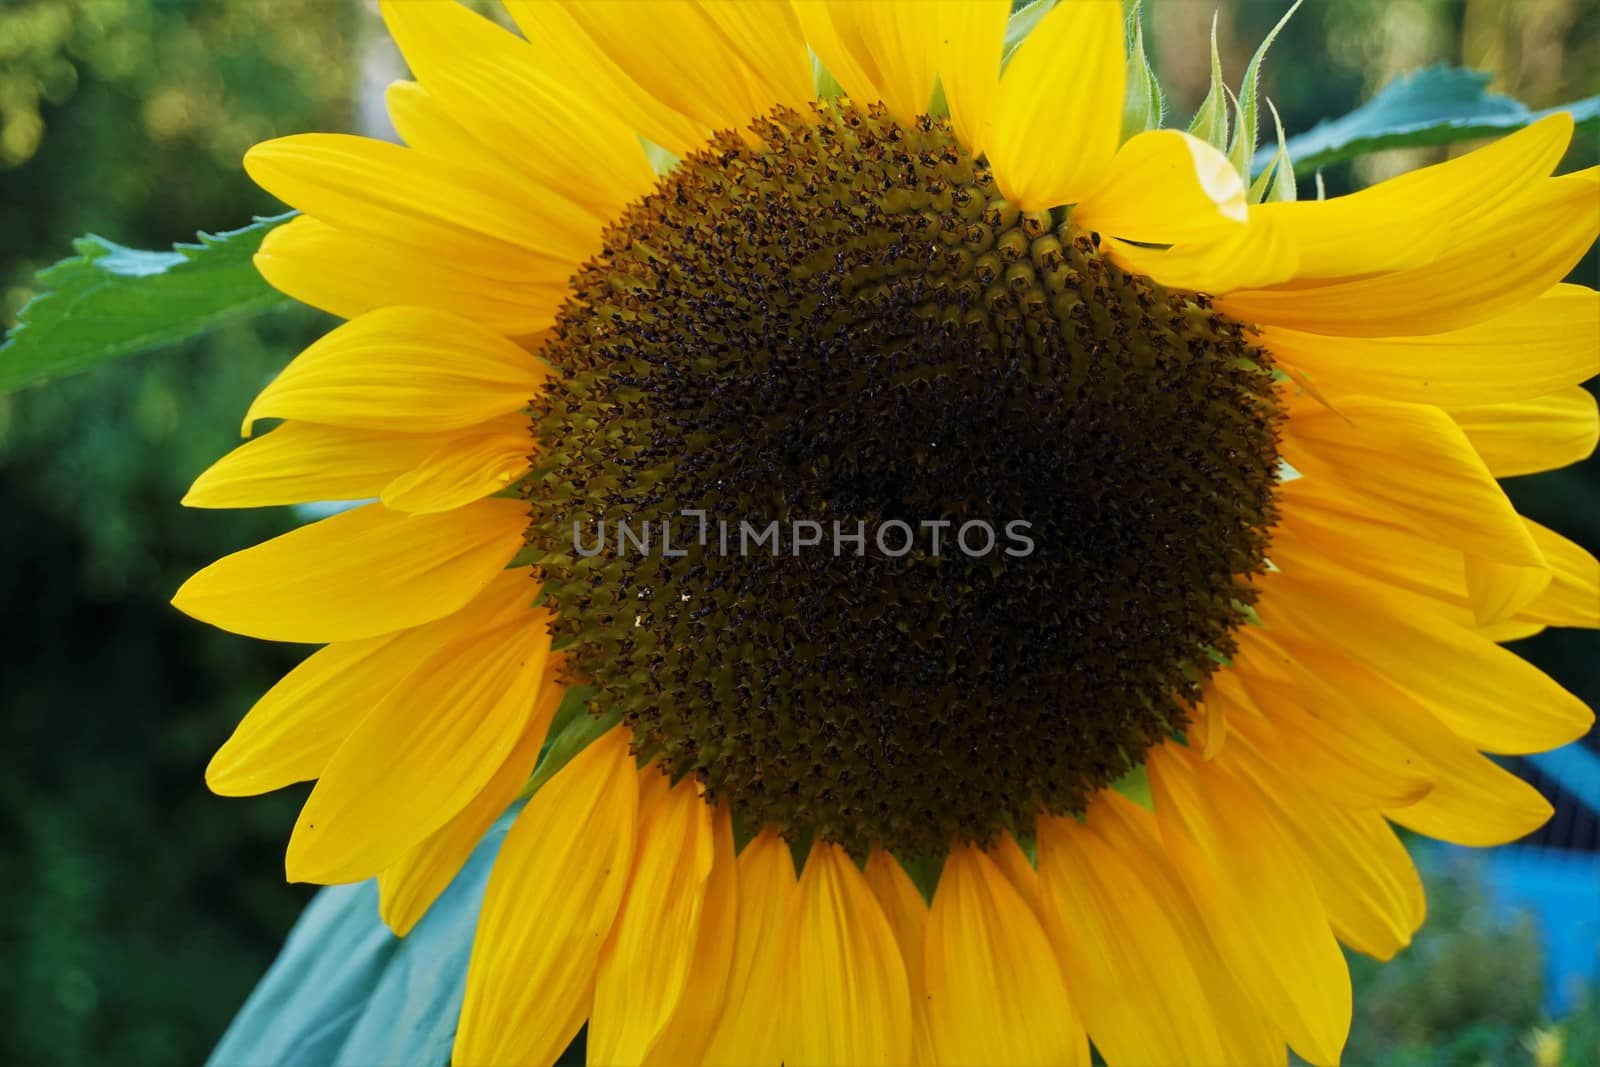 Blossom of a common sunflower Heliantus annuus by pisces2386